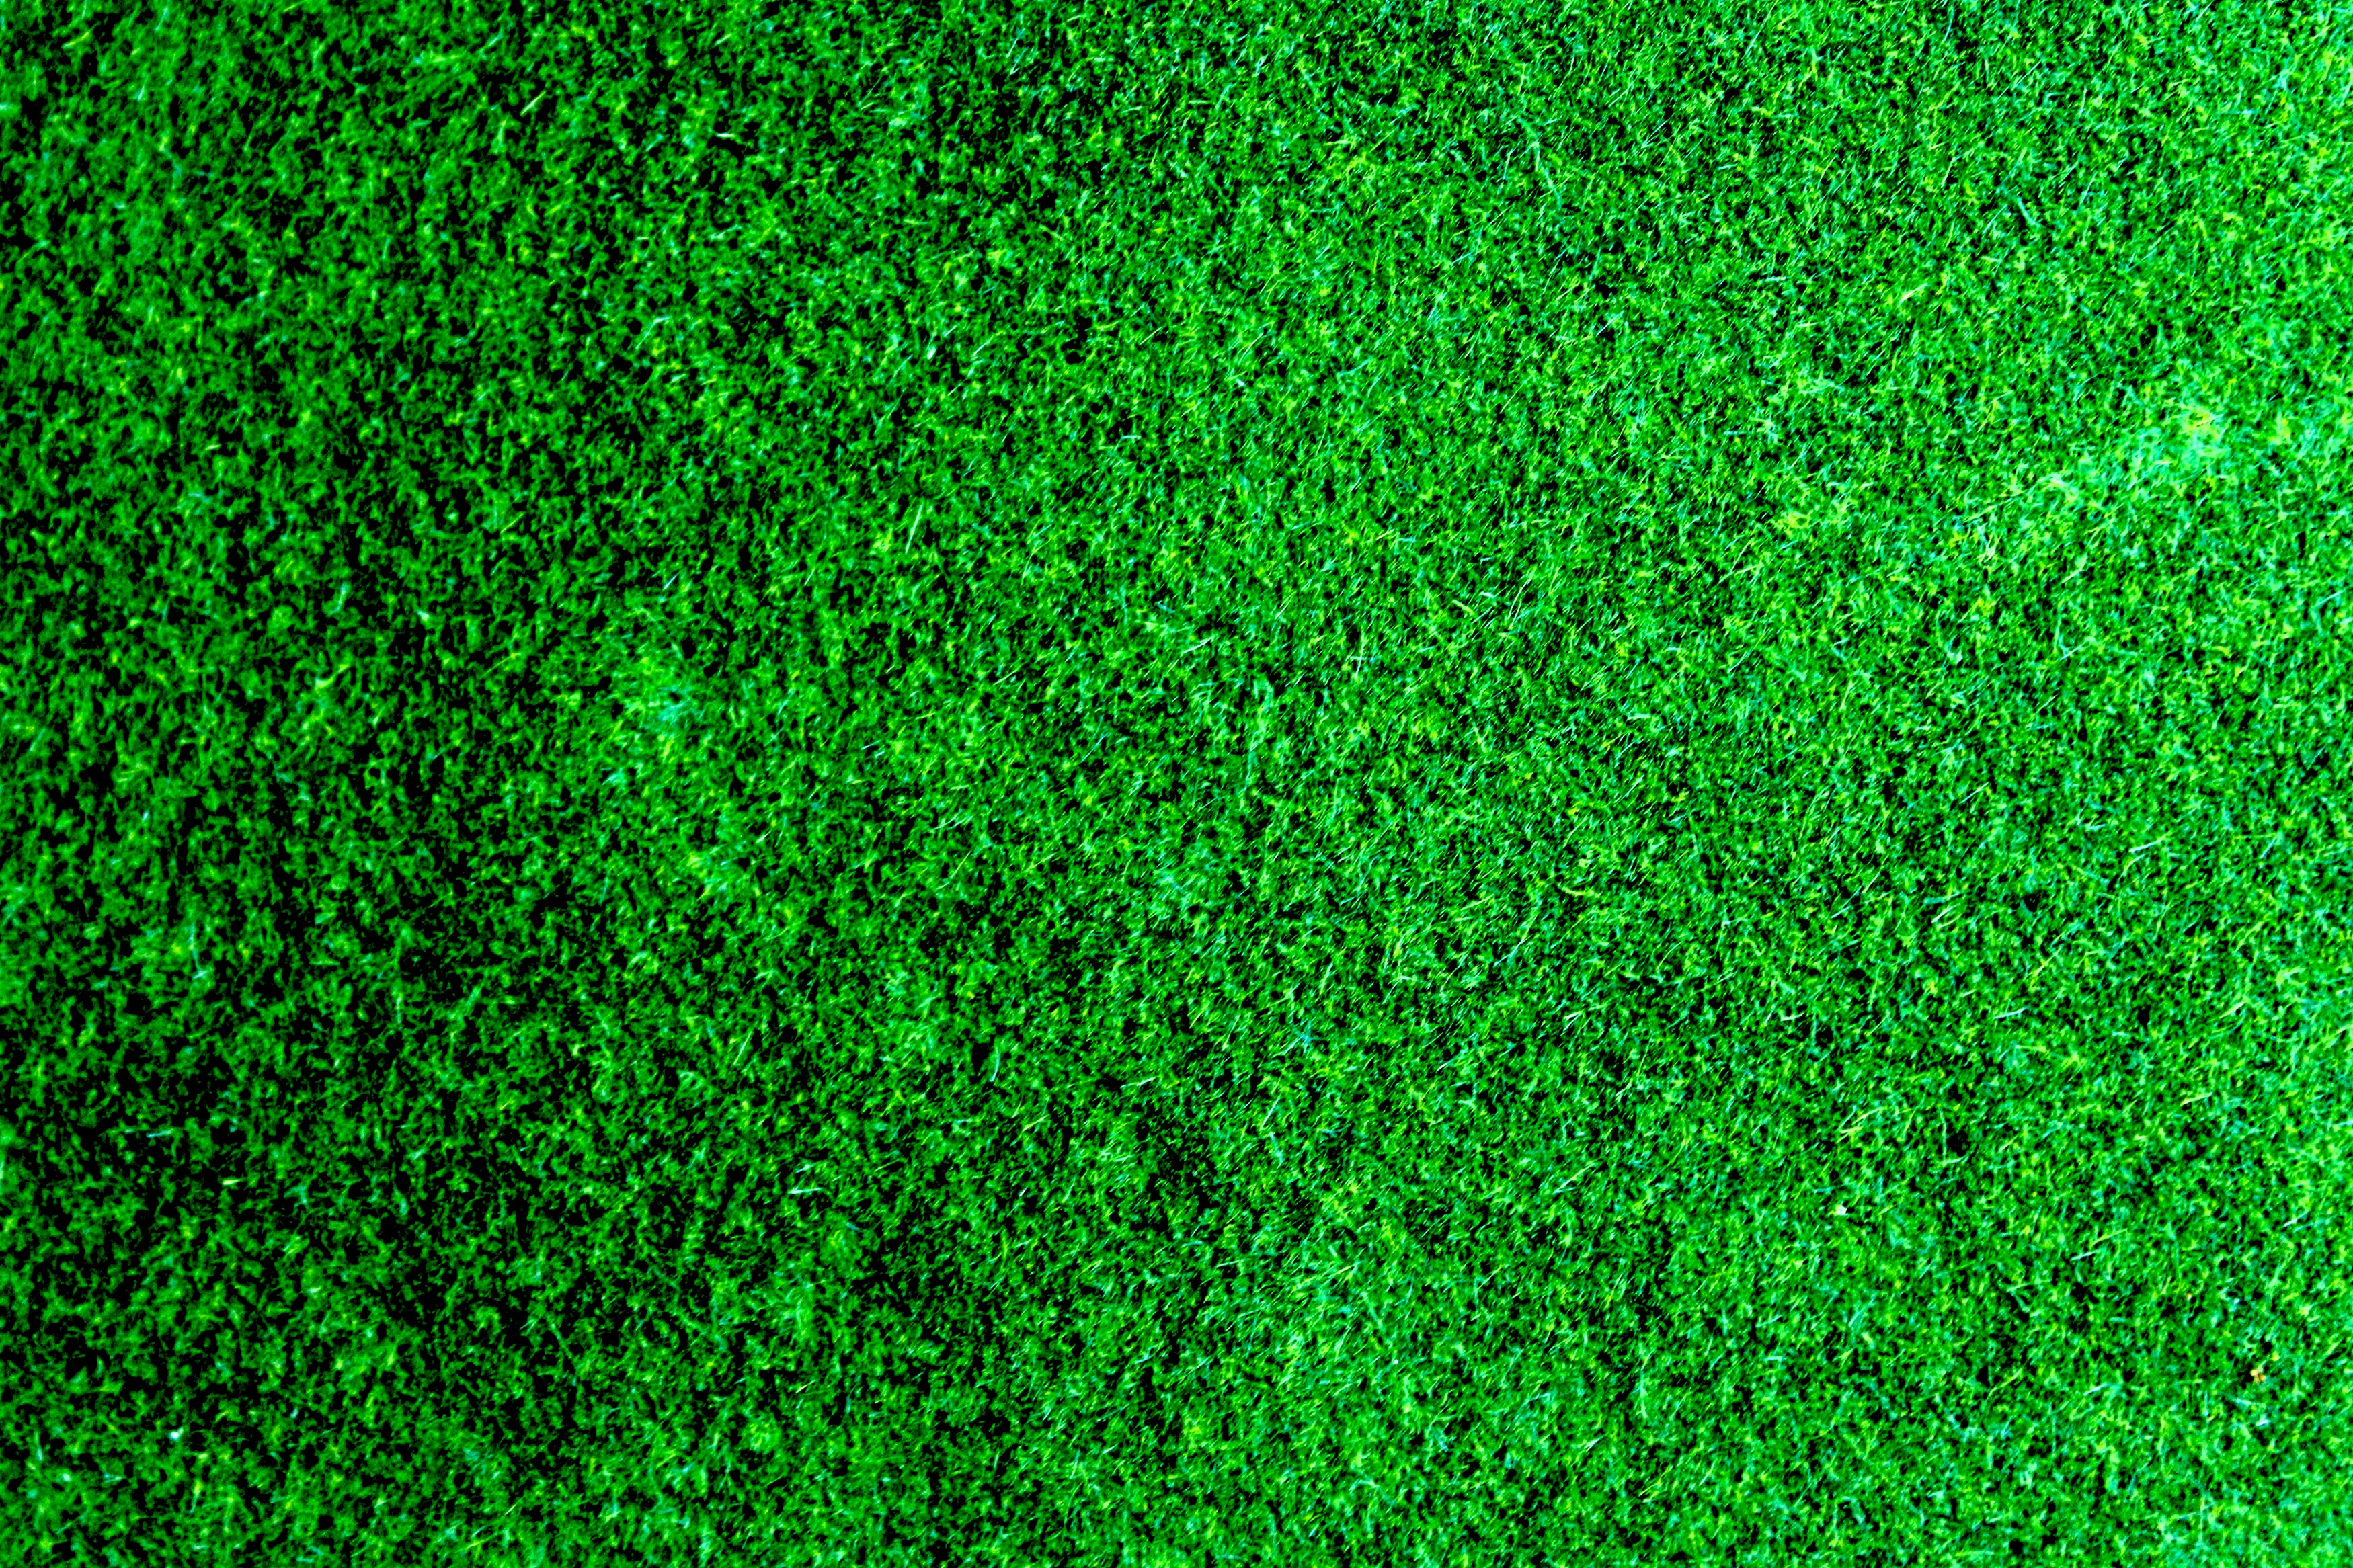 Free stock photos of grass background · Pexels